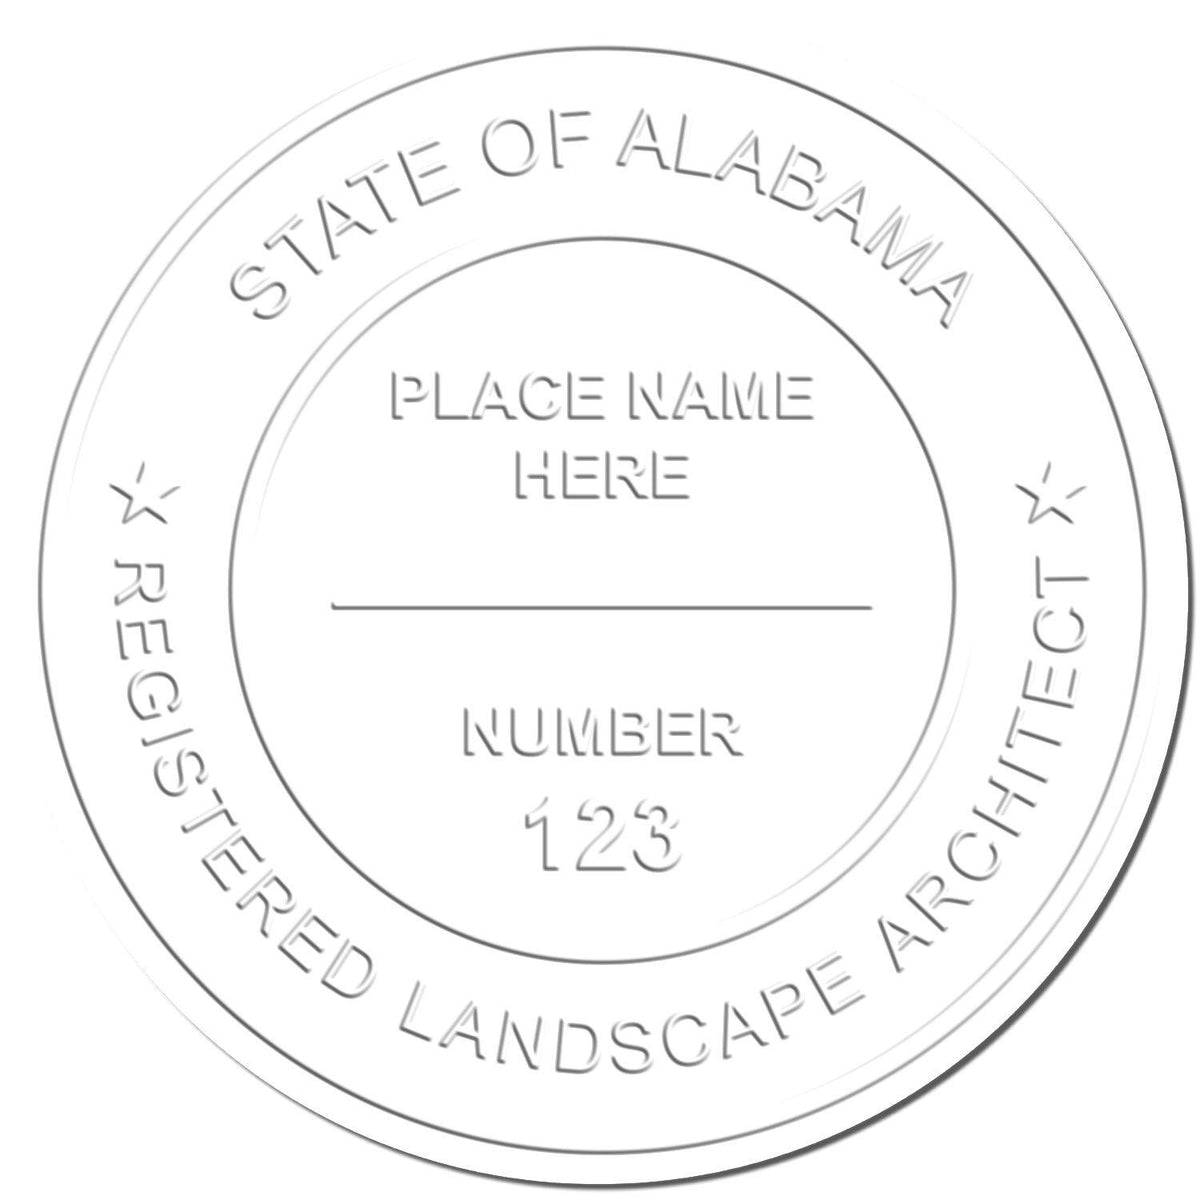 Landscape Architect Pink Gift Embosser - Engineer Seal Stamps - Embosser Type_Desk, Embosser Type_Gift, Type of Use_Professional